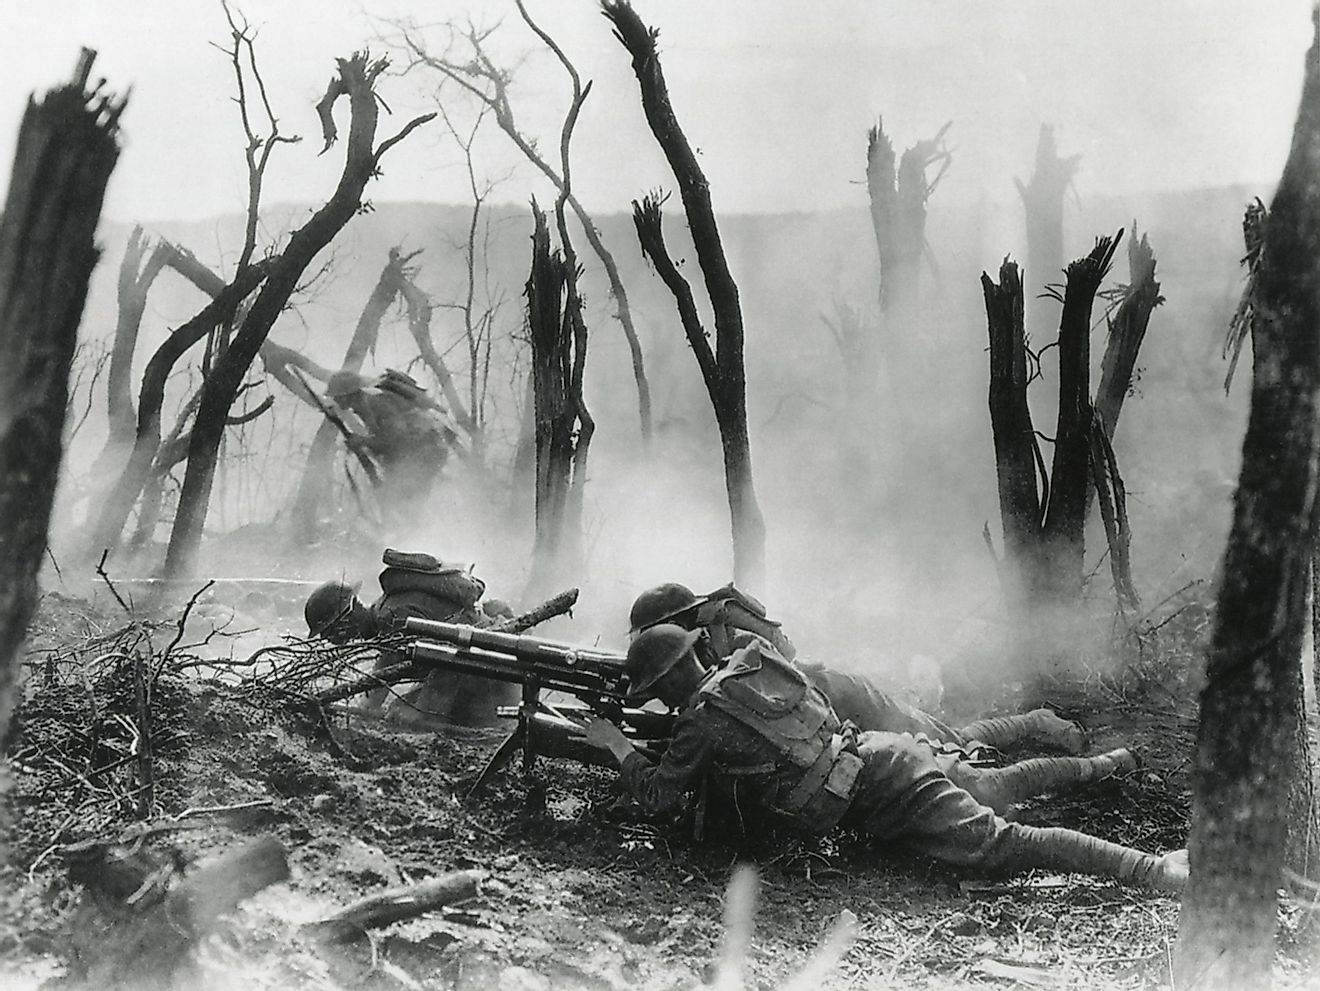 World War 1. American gun crew from the 23rd Infantry, firing a French 37mm cannon in World War I action in Belleau Wood. June 3, 1918. Image source: Everett Collection/Shutterstock.com